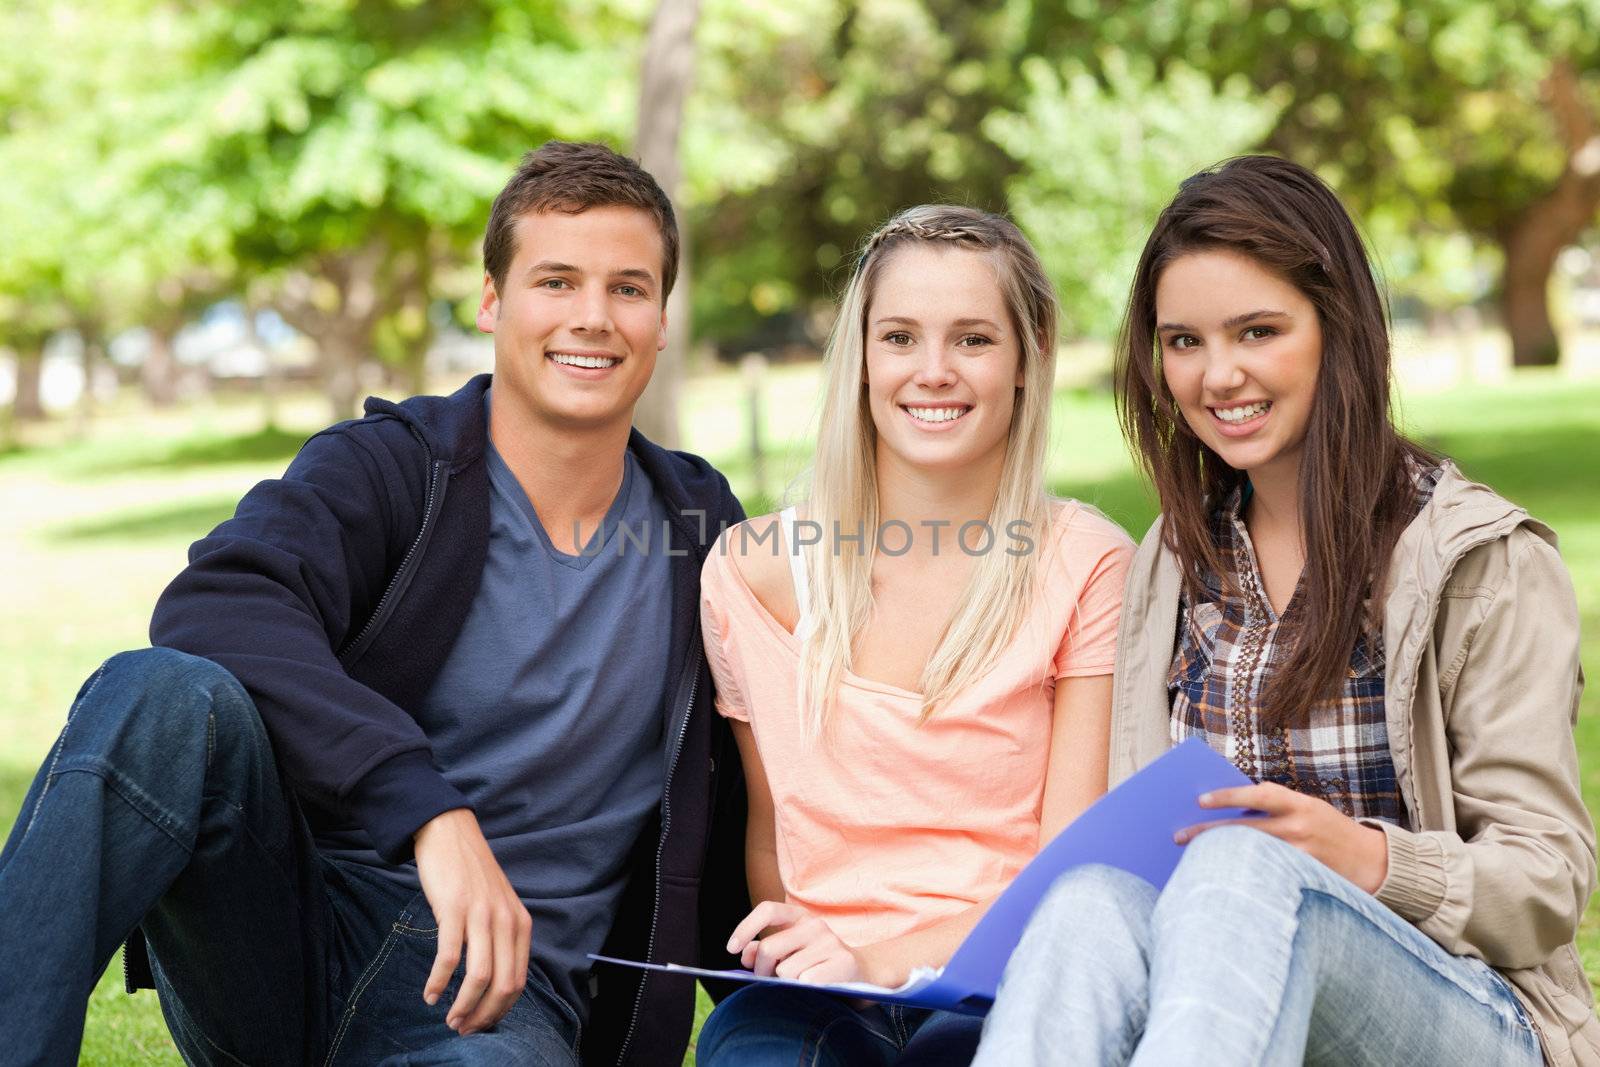 Portrait of three teenagers studying together in a park